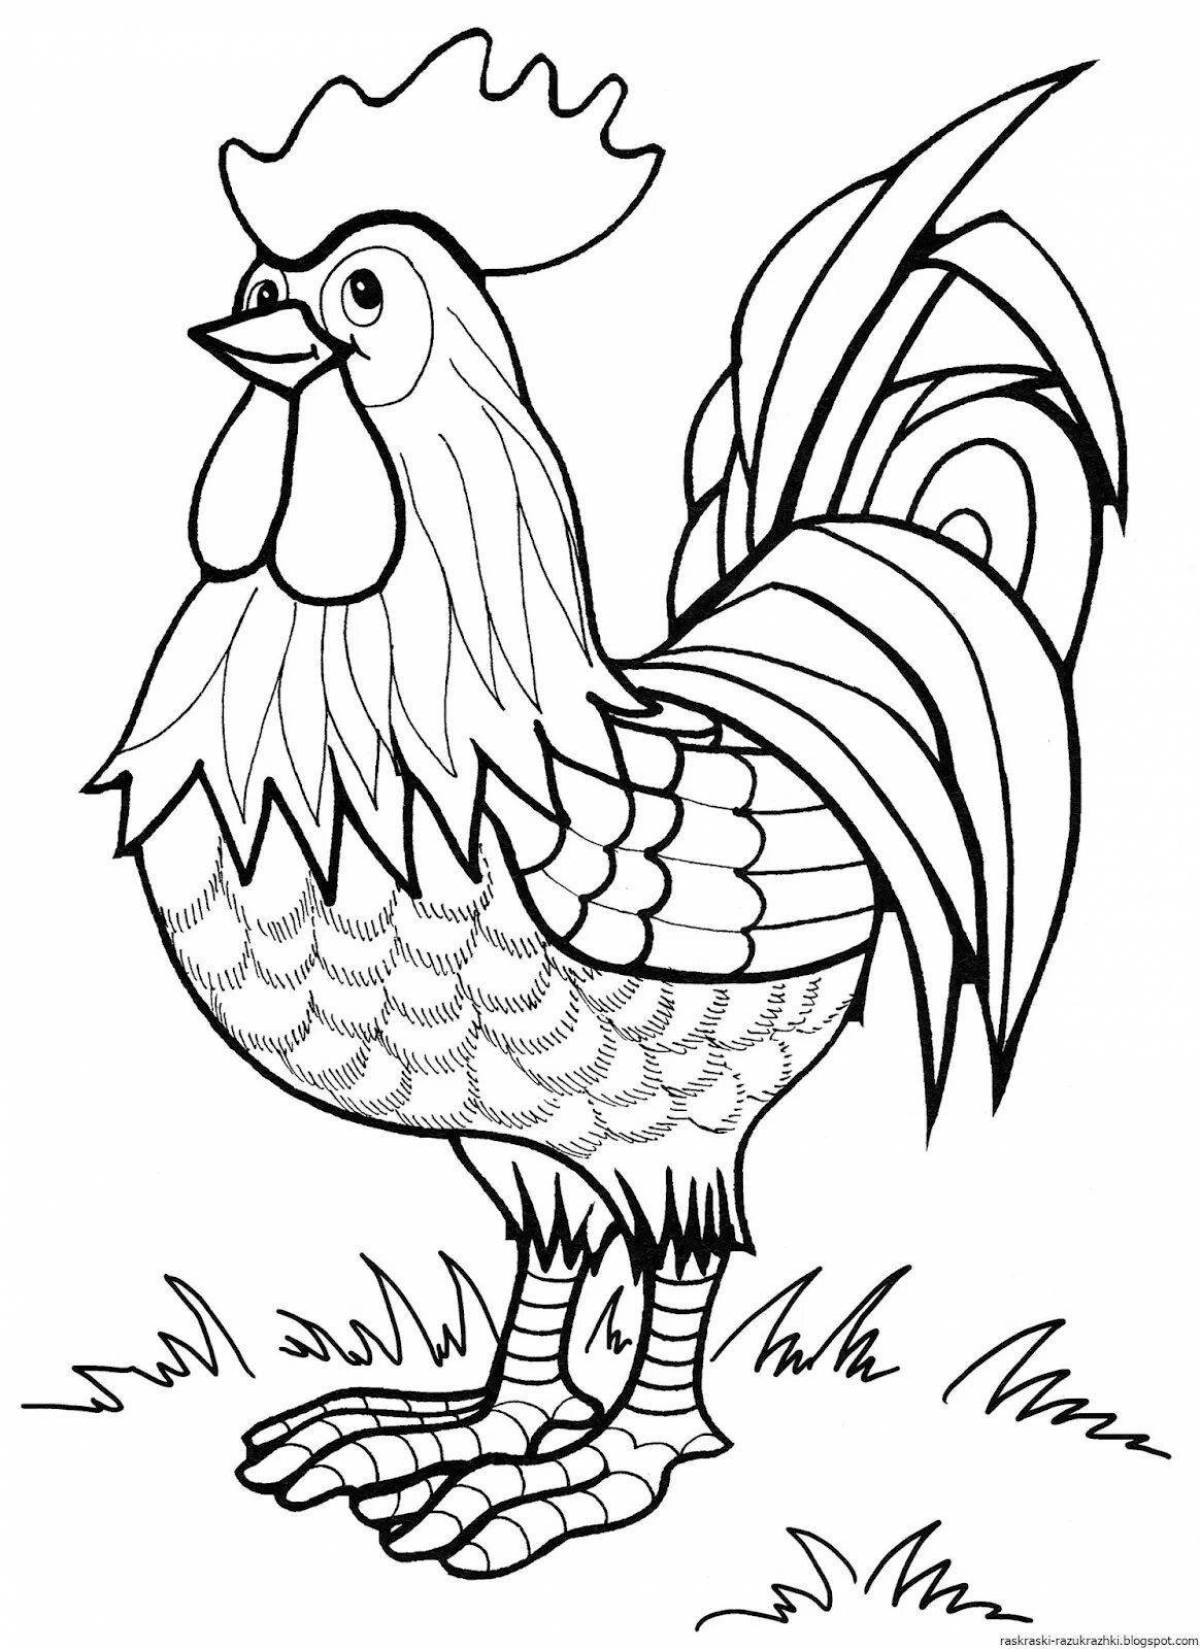 Adorable rooster coloring page for children 6-7 years old